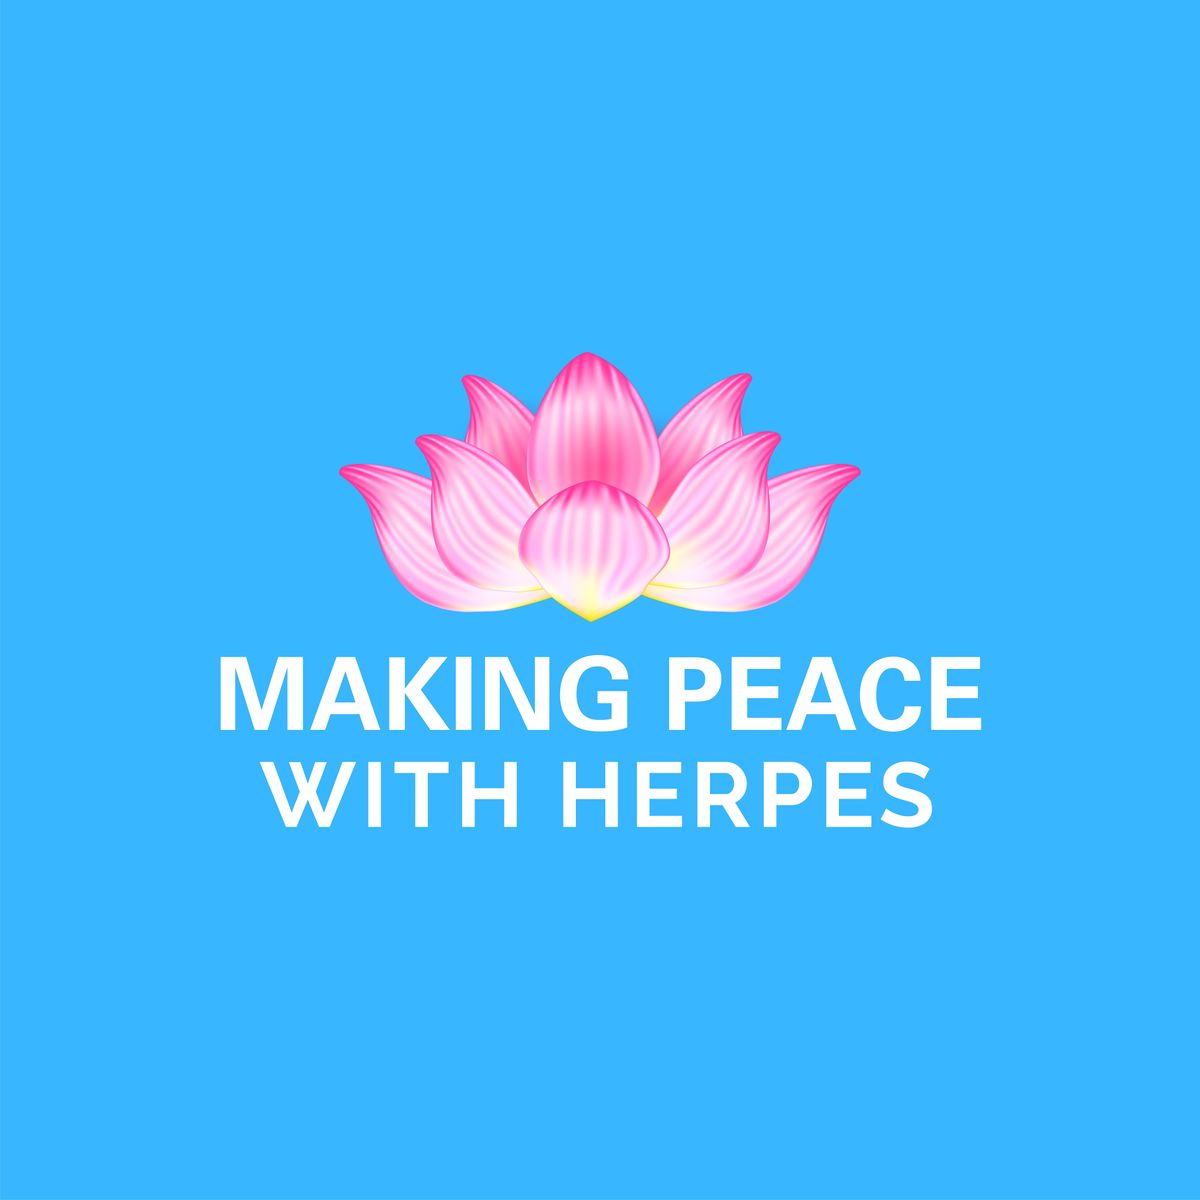 Making Peace With Herpes- Daring to Live Outbreak Free NYC